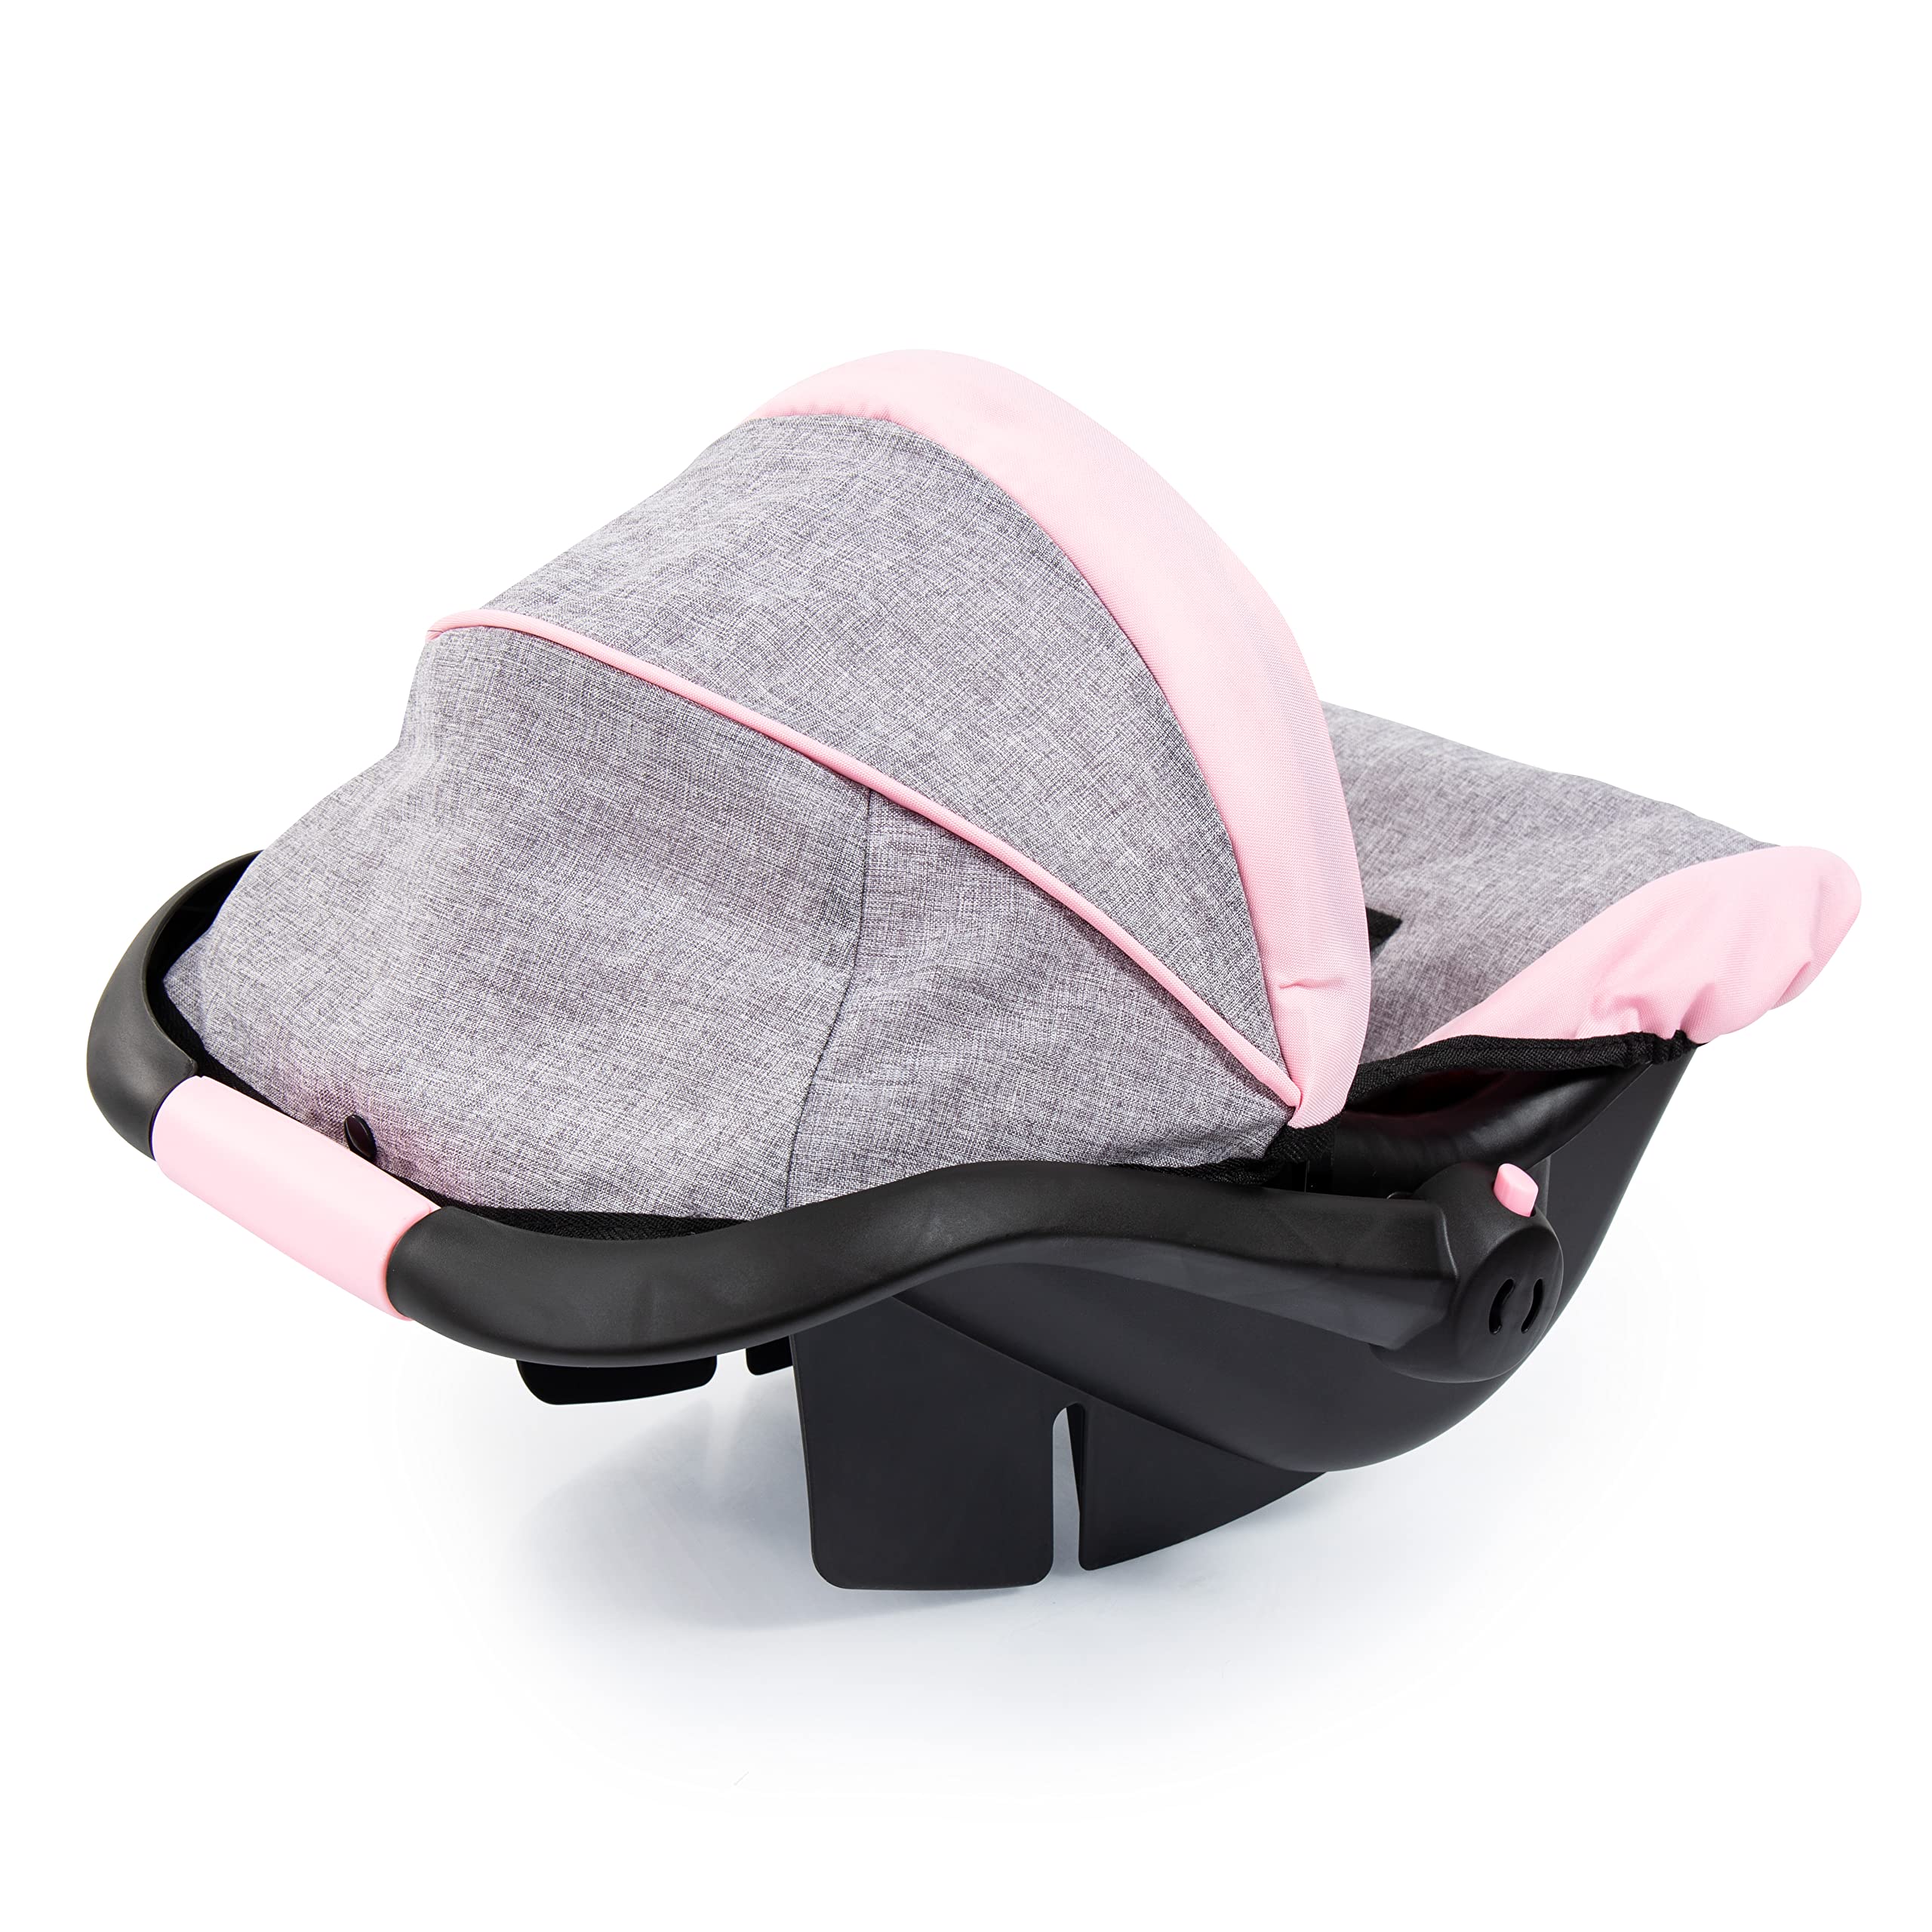 Bayer Design 67933AA Toy, Car Seat Easy Go for Neo Vario Pram with Cover, Doll Accessories, Pink, Grey with Butterfly